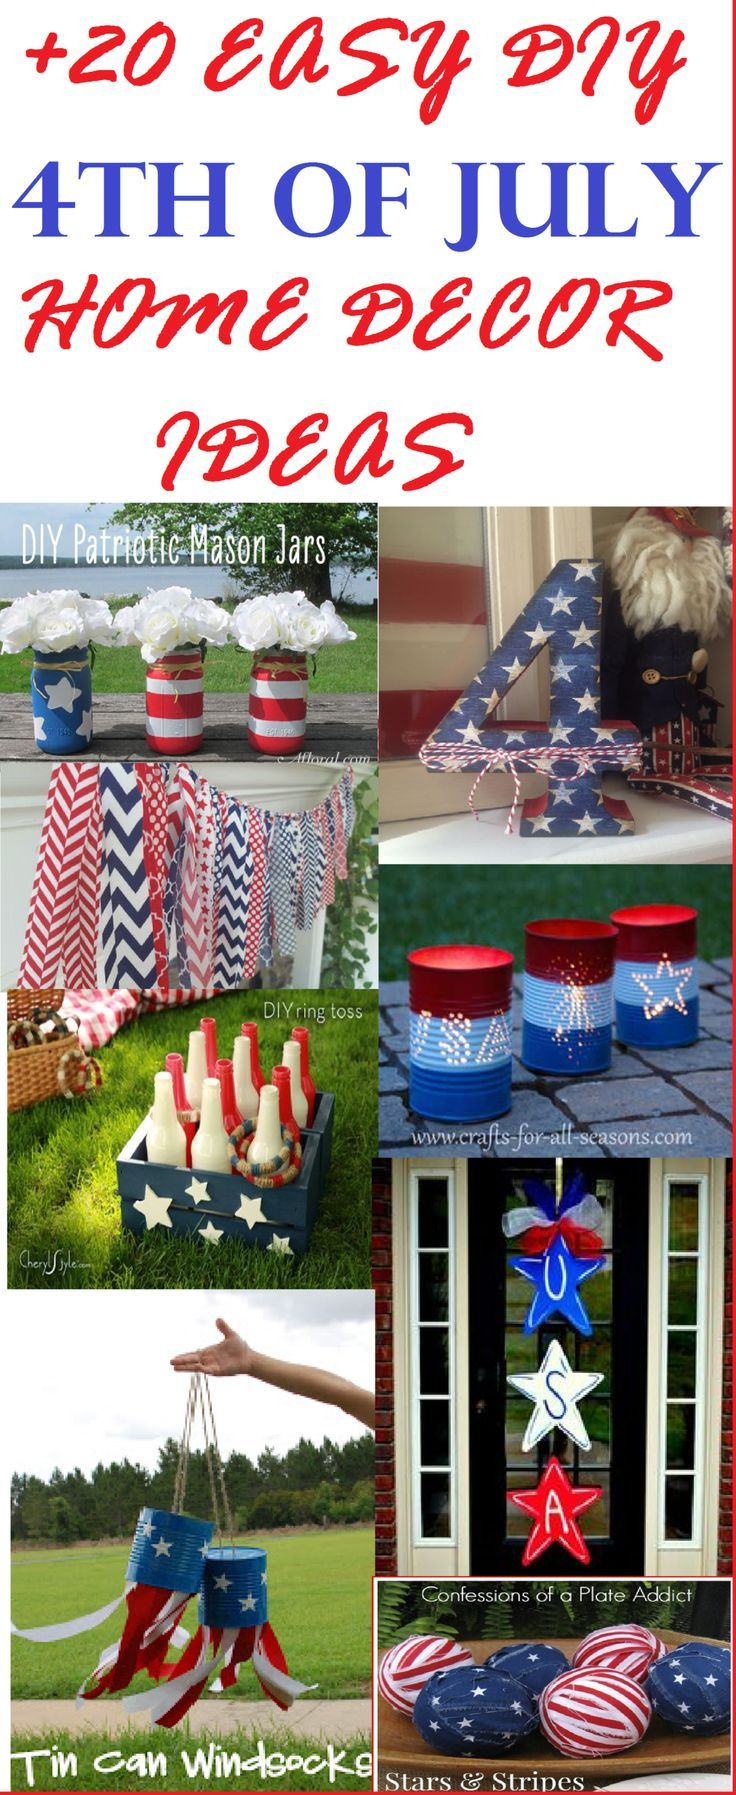 4th Of July Vacation Ideas
 DIY your own July 4th holiday decor Over 20 easy DIY 4th